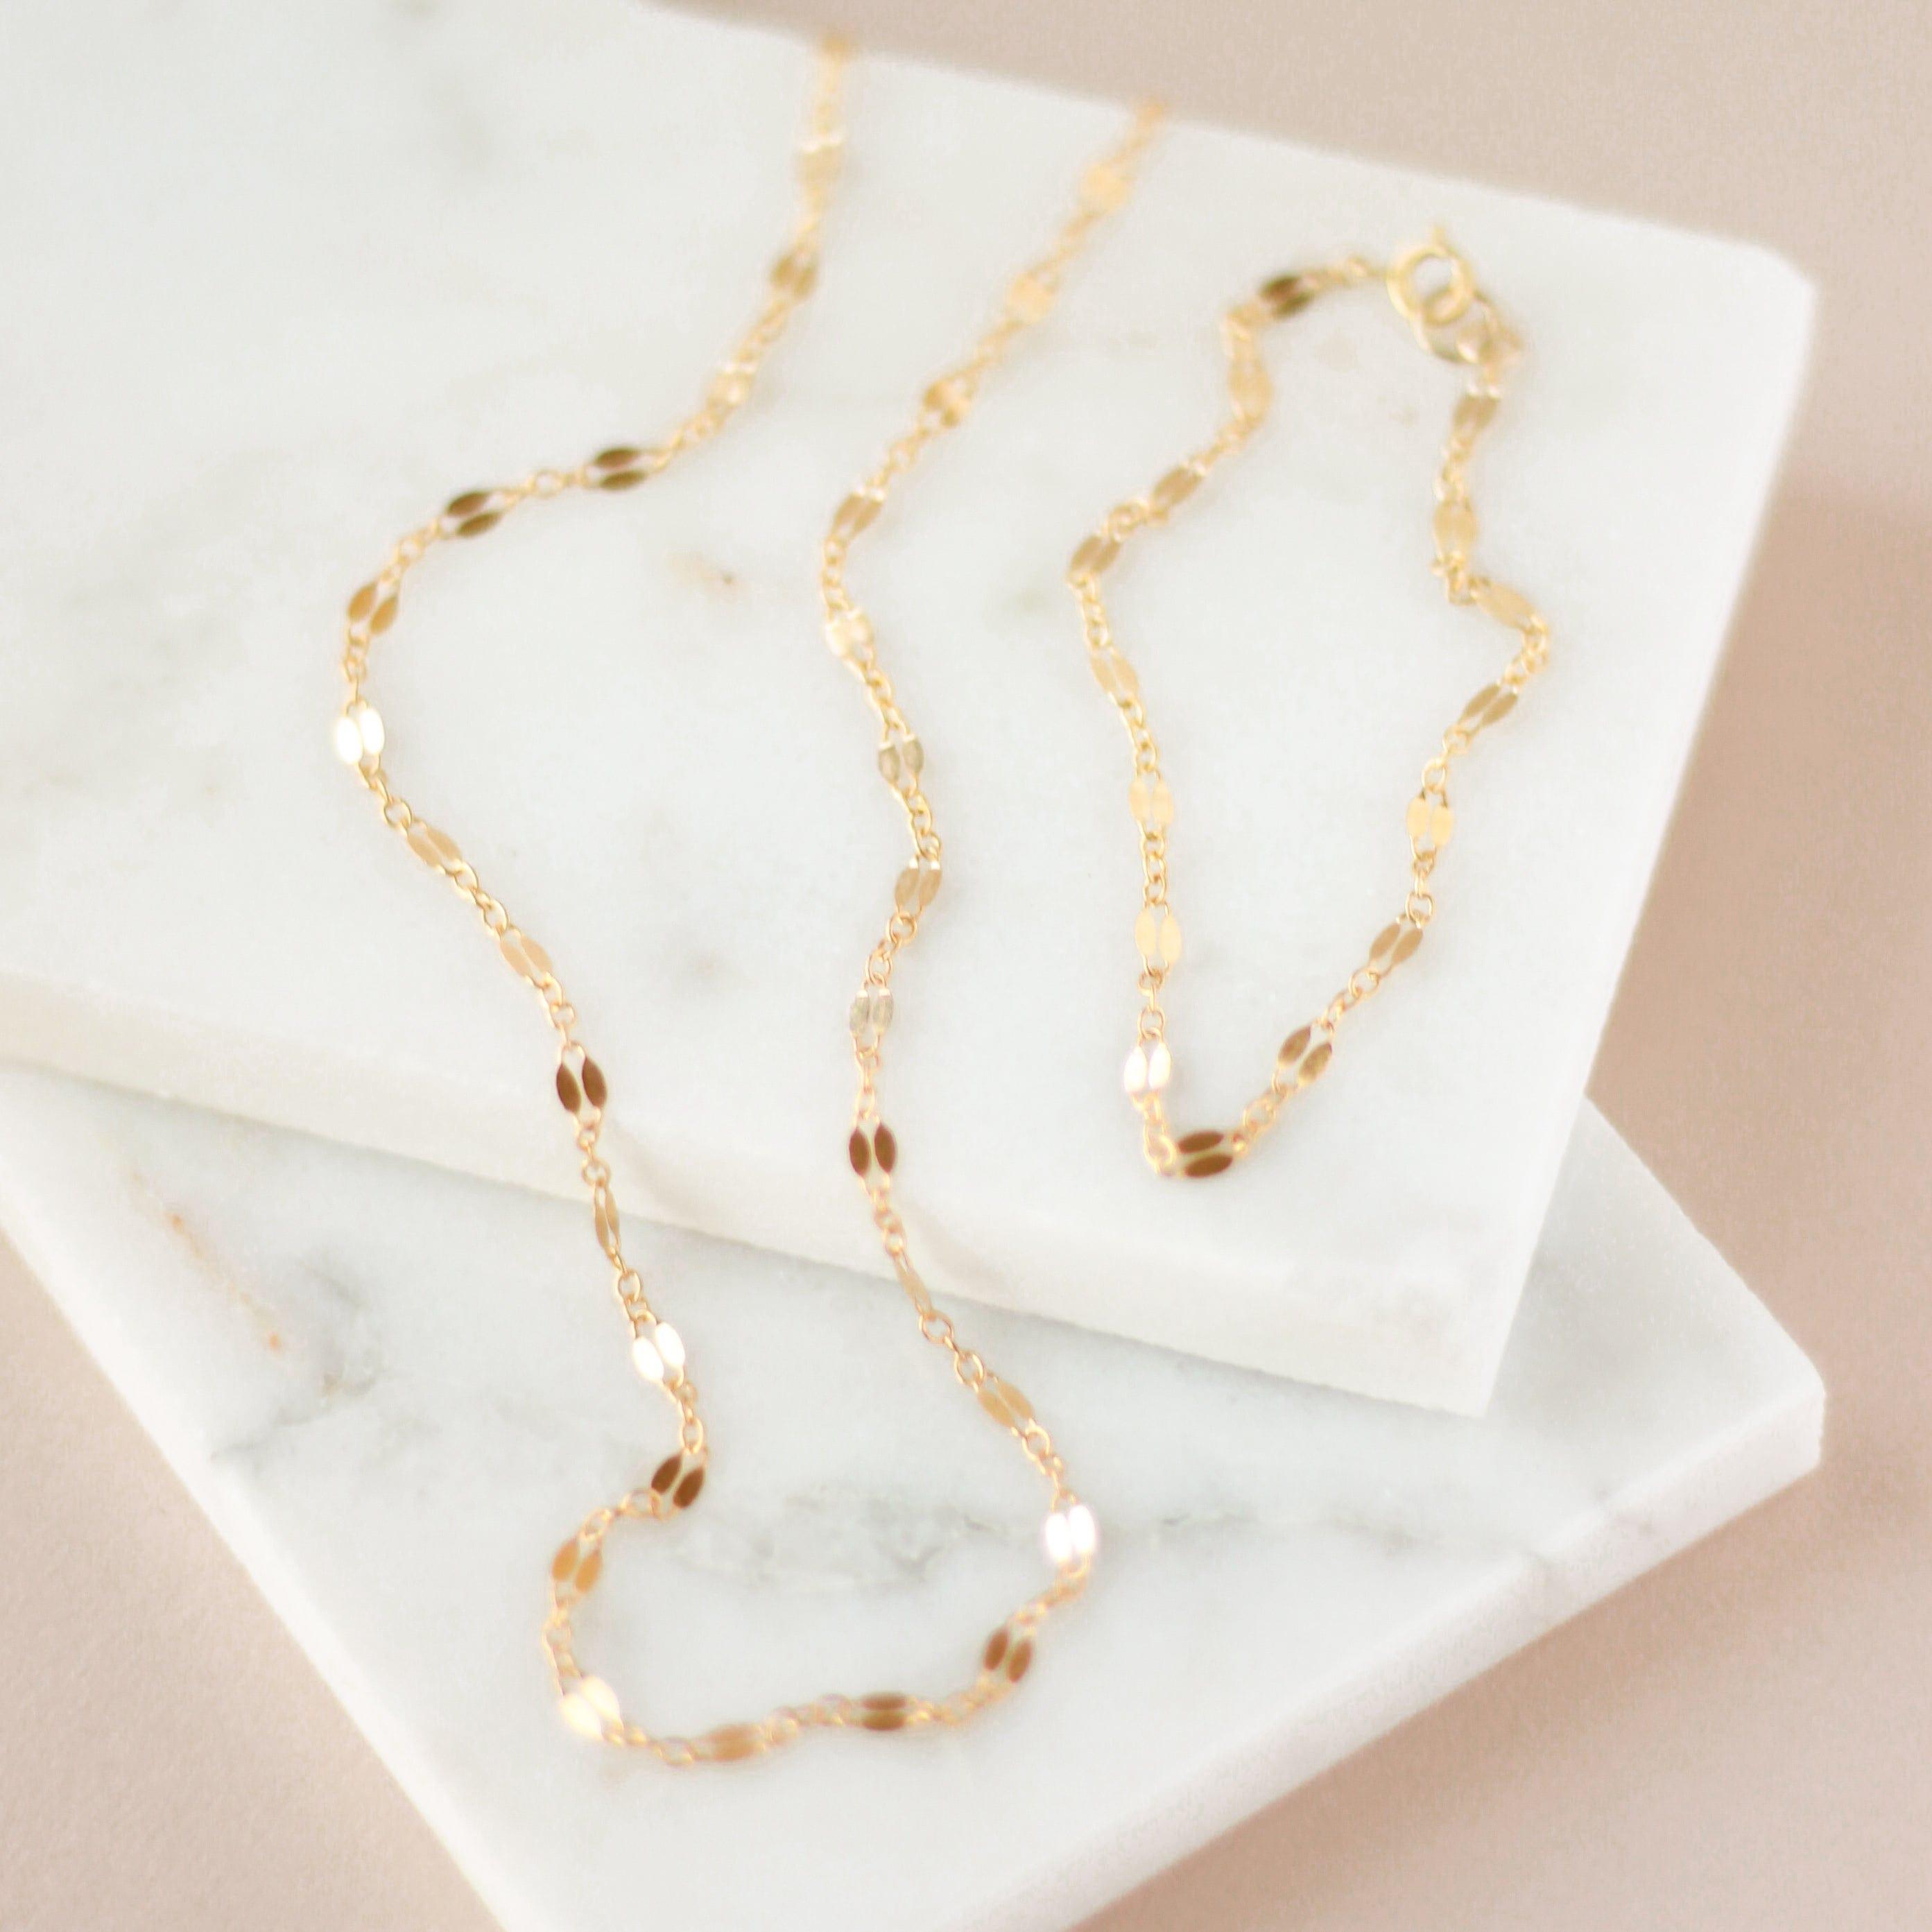 Lace Chain Necklace - Nolia Jewelry - Meaningful + Sustainably Handcrafted Jewelry